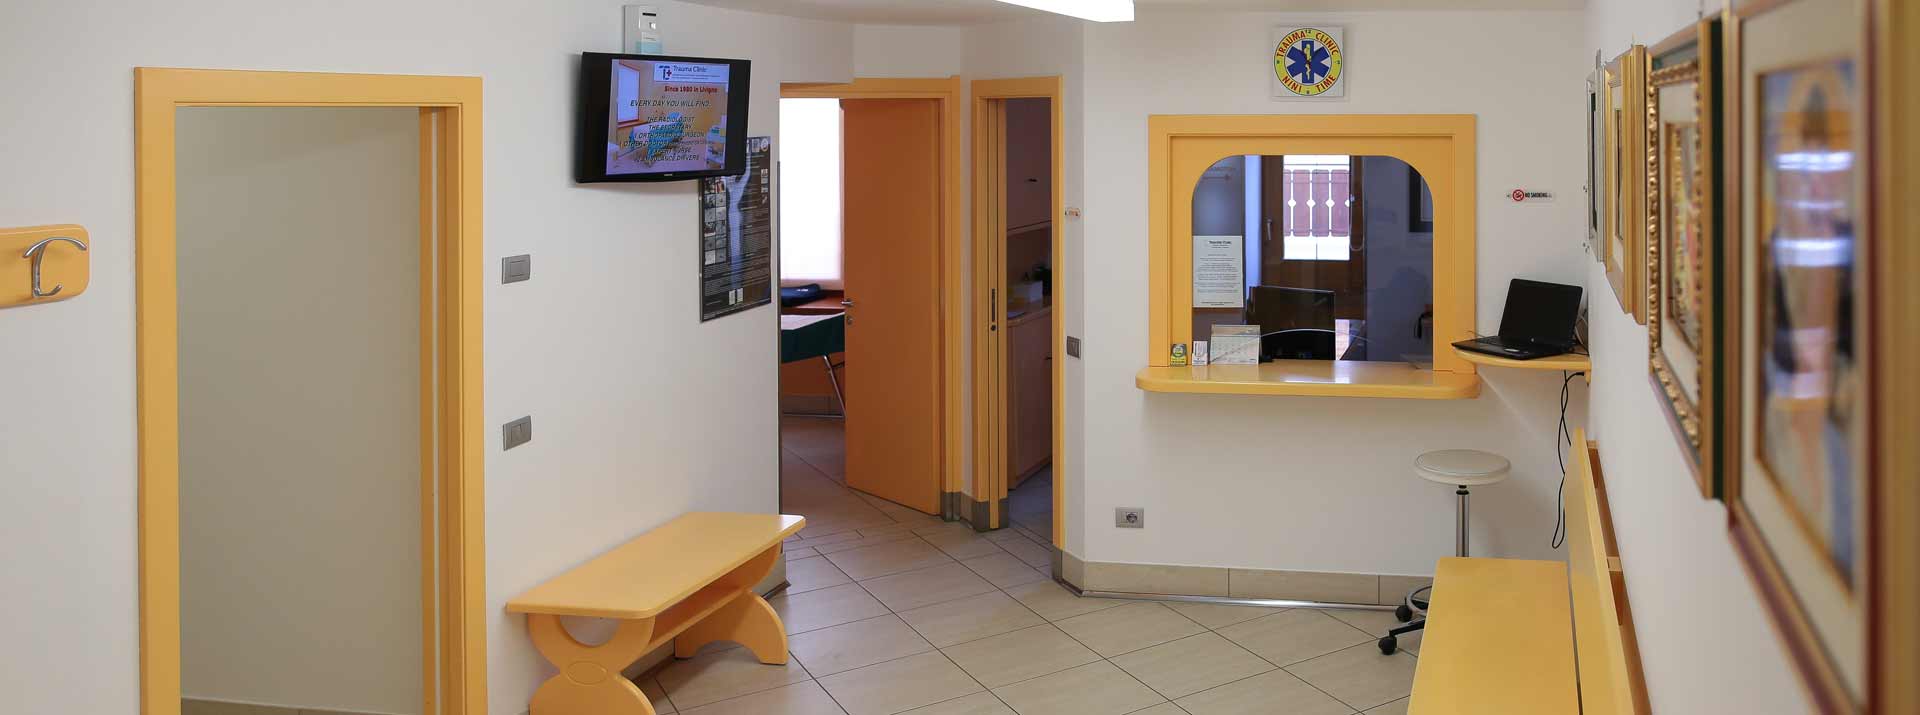 Orthopedic Traumatology Specialized Outpatient Clinic